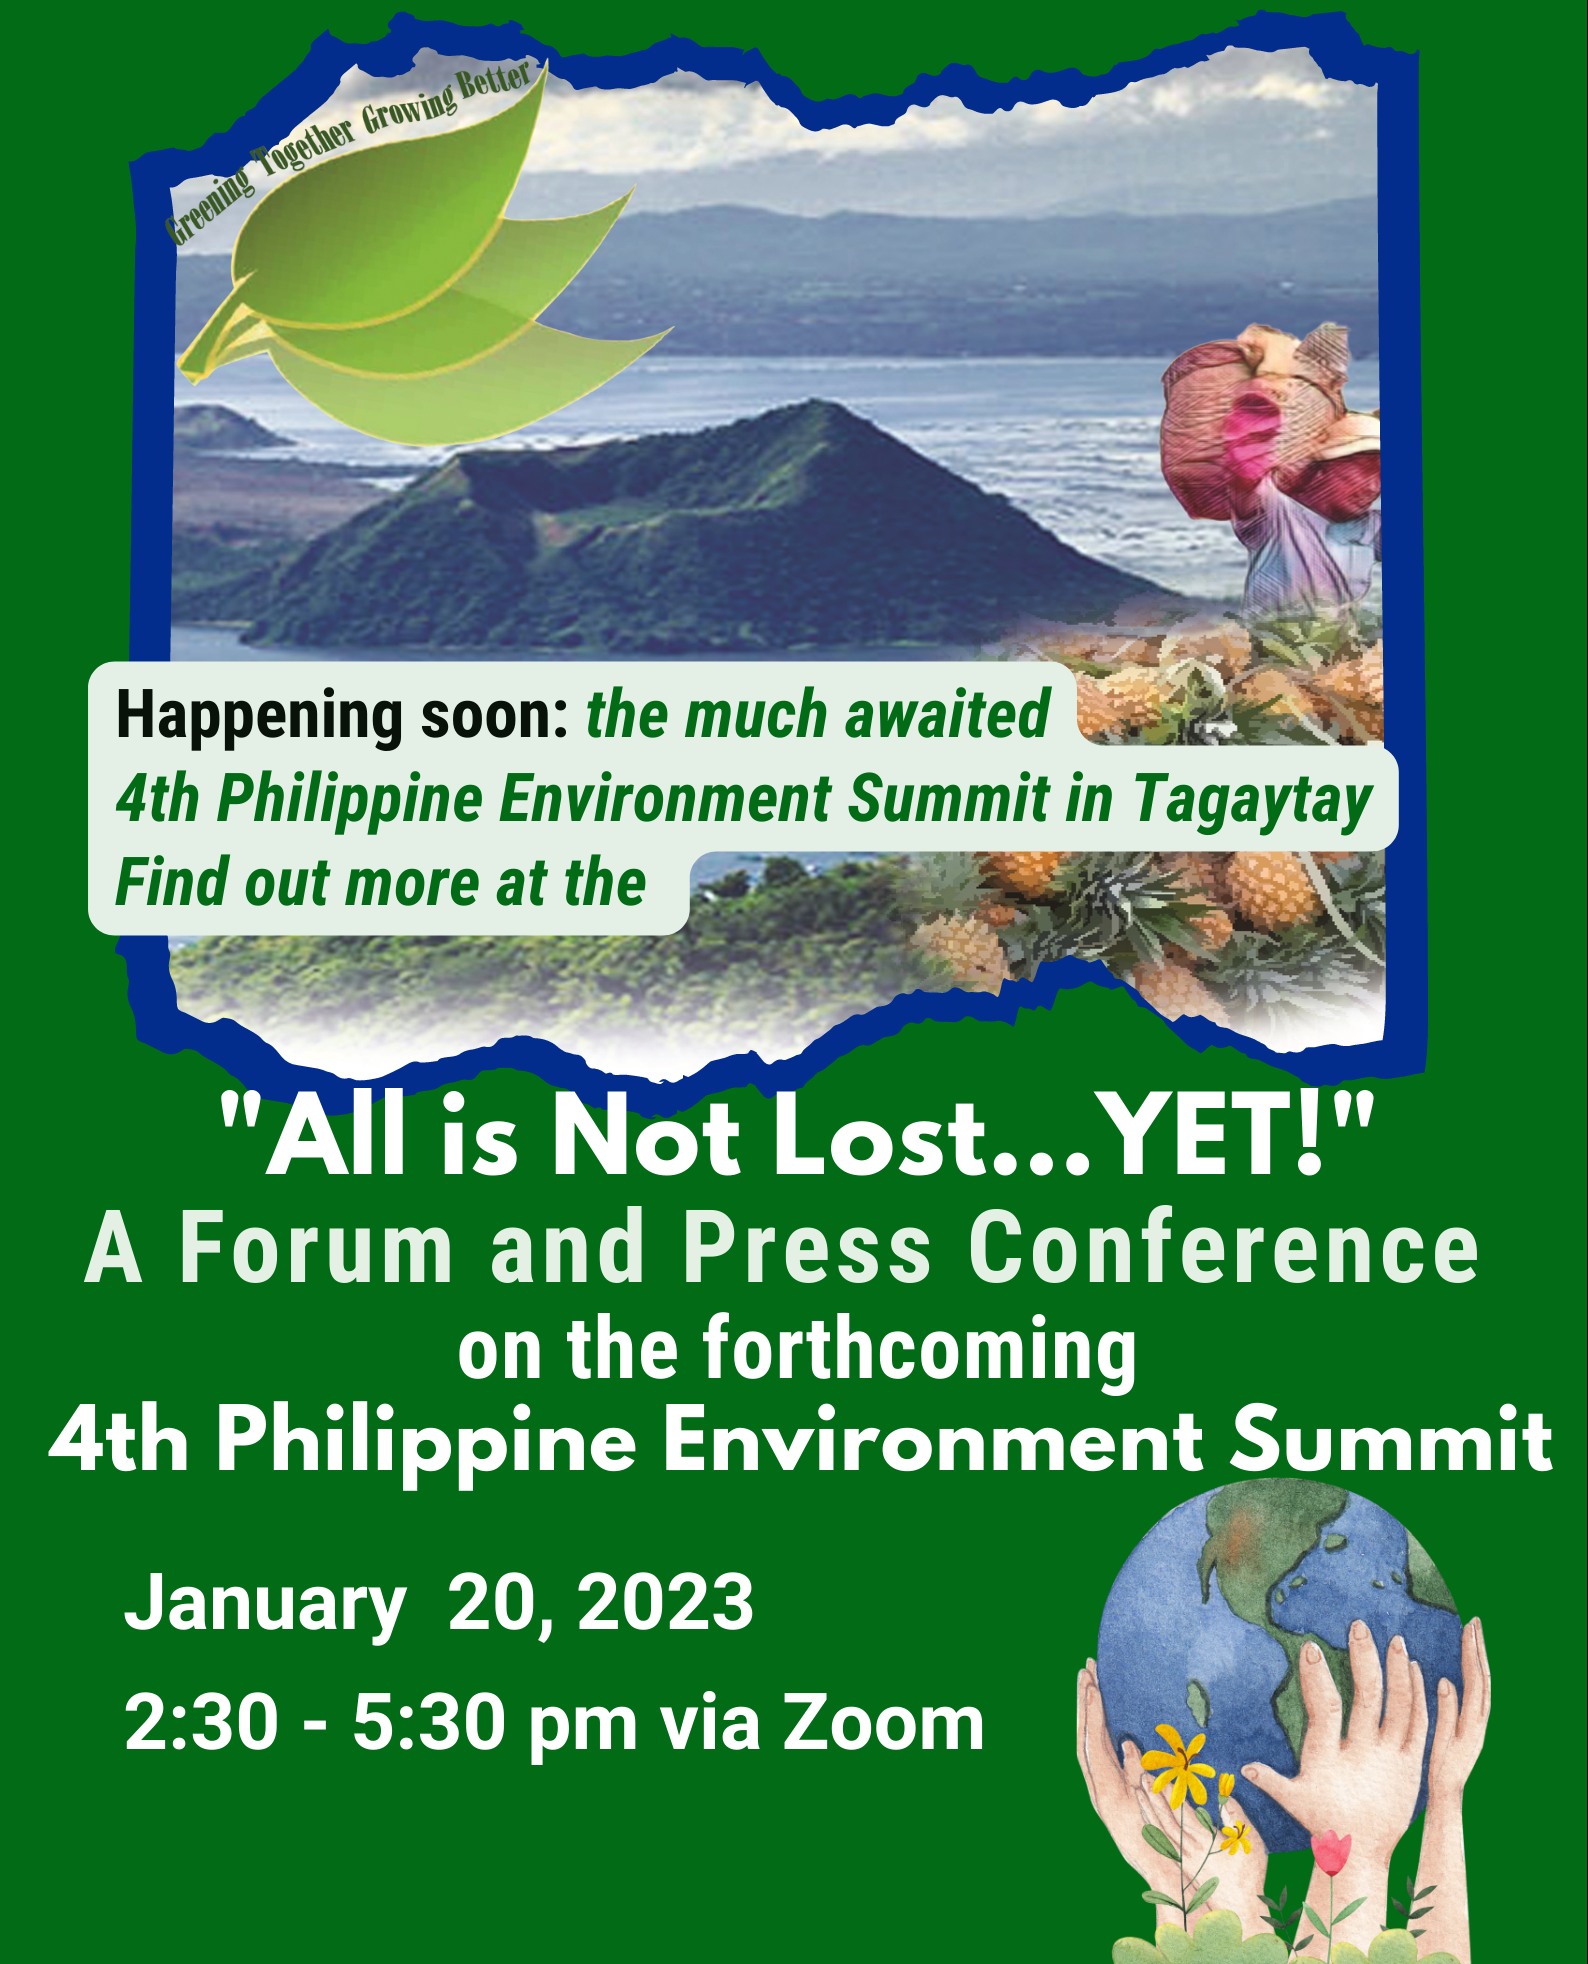 "All is not Lost...YET!" A Forum and Press Conference on the forthcoming 4th Philippine Environment Summit